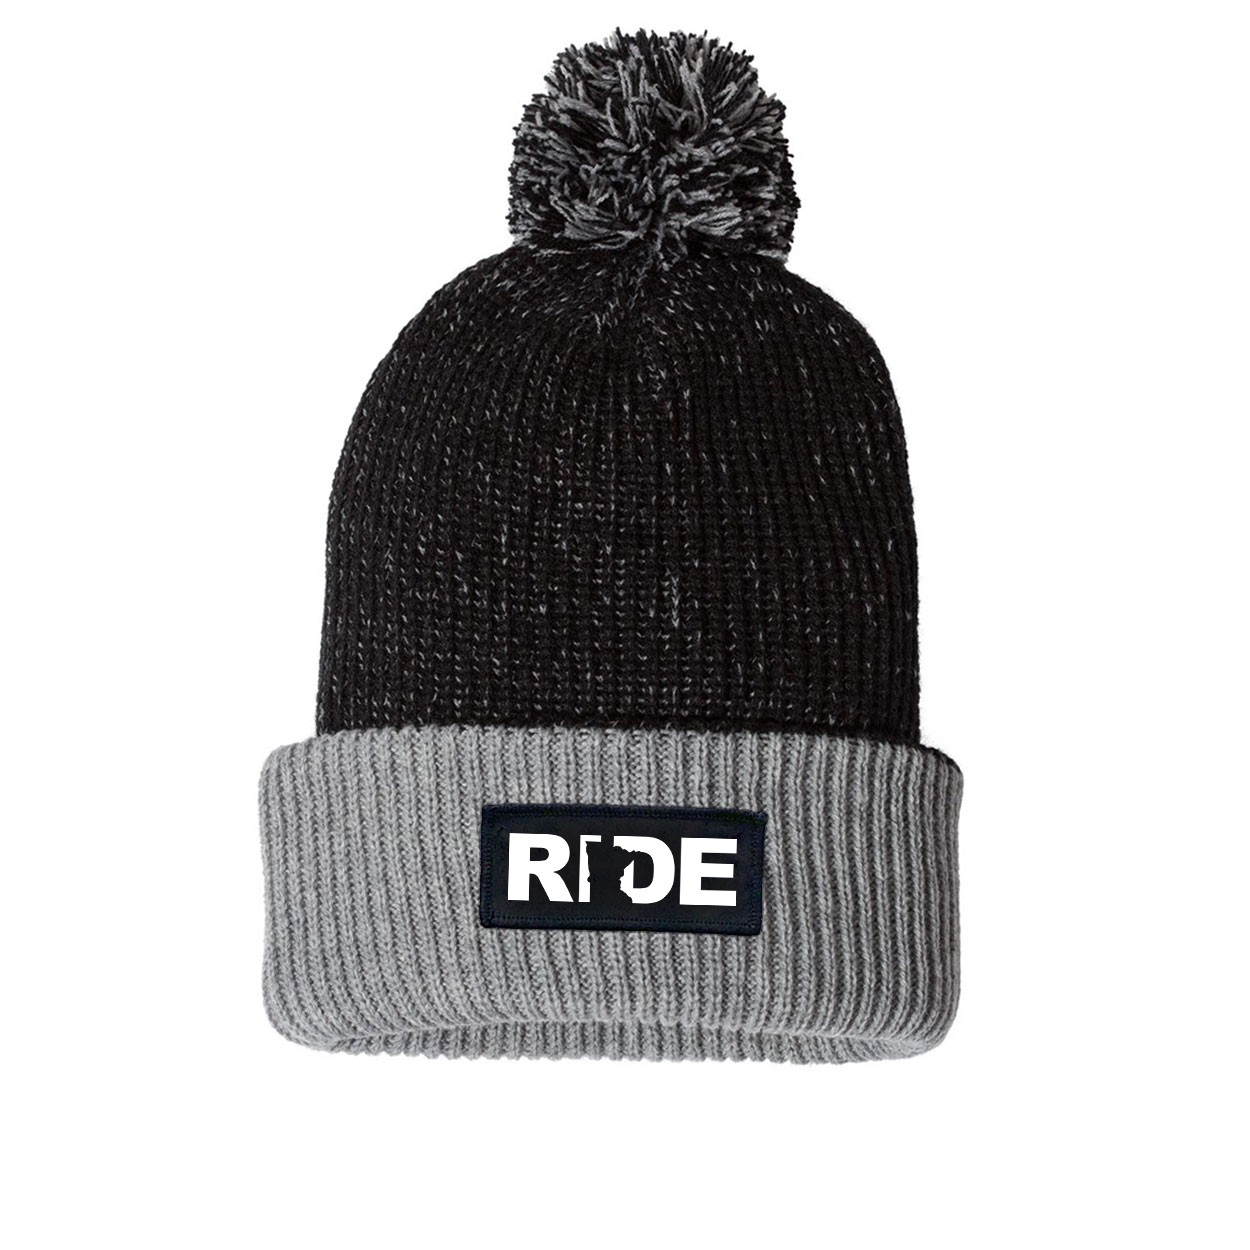 Ride Minnesota Night Out Woven Patch Roll Up Pom Knit Beanie Black/Gray (White Logo)